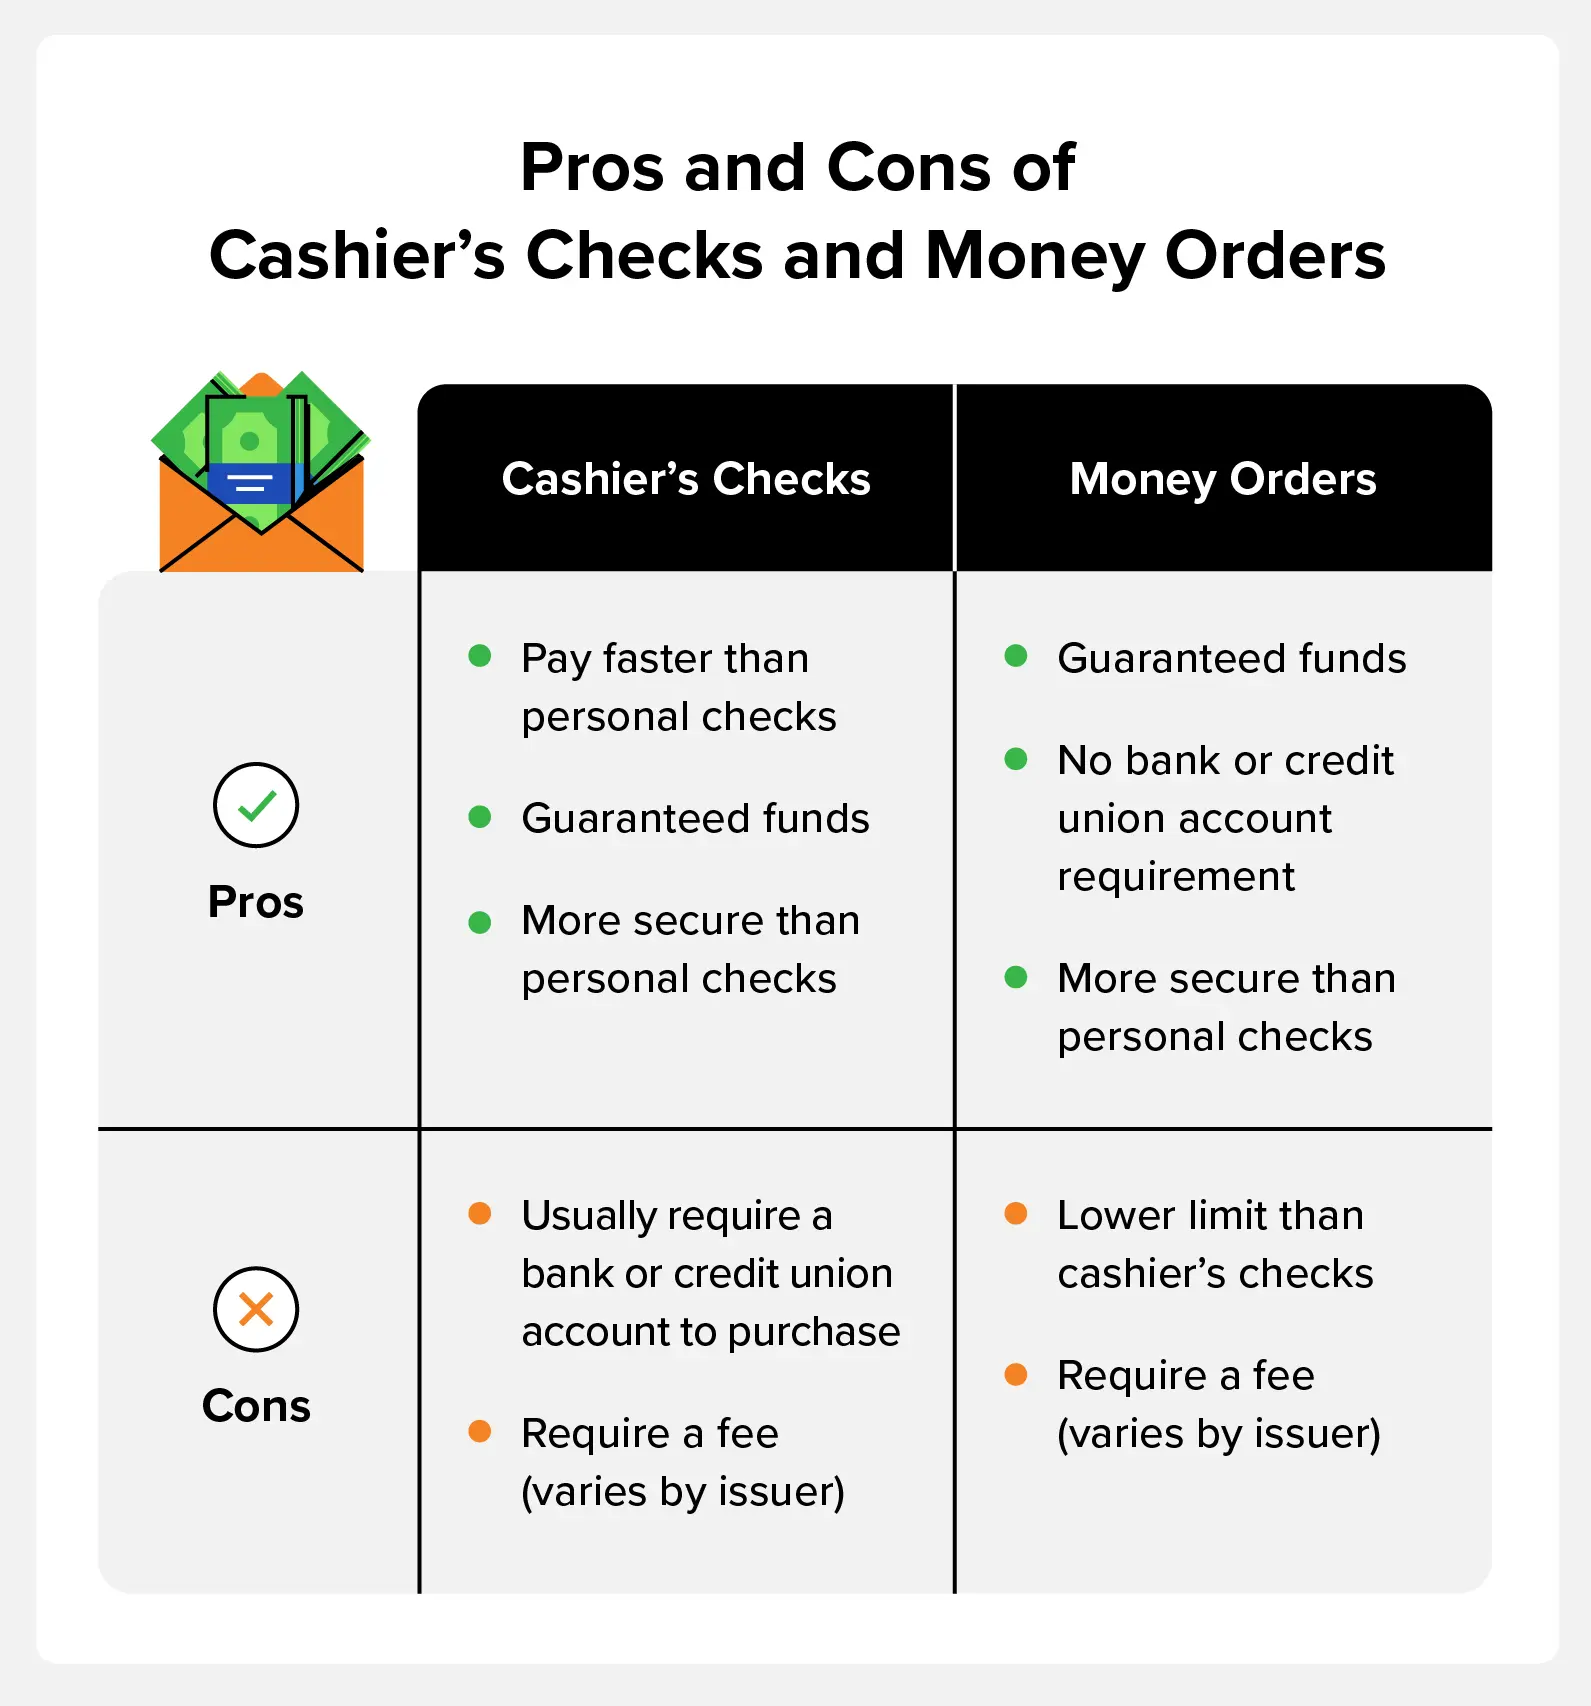 Pros and cons of cashier’s checks and money orders.